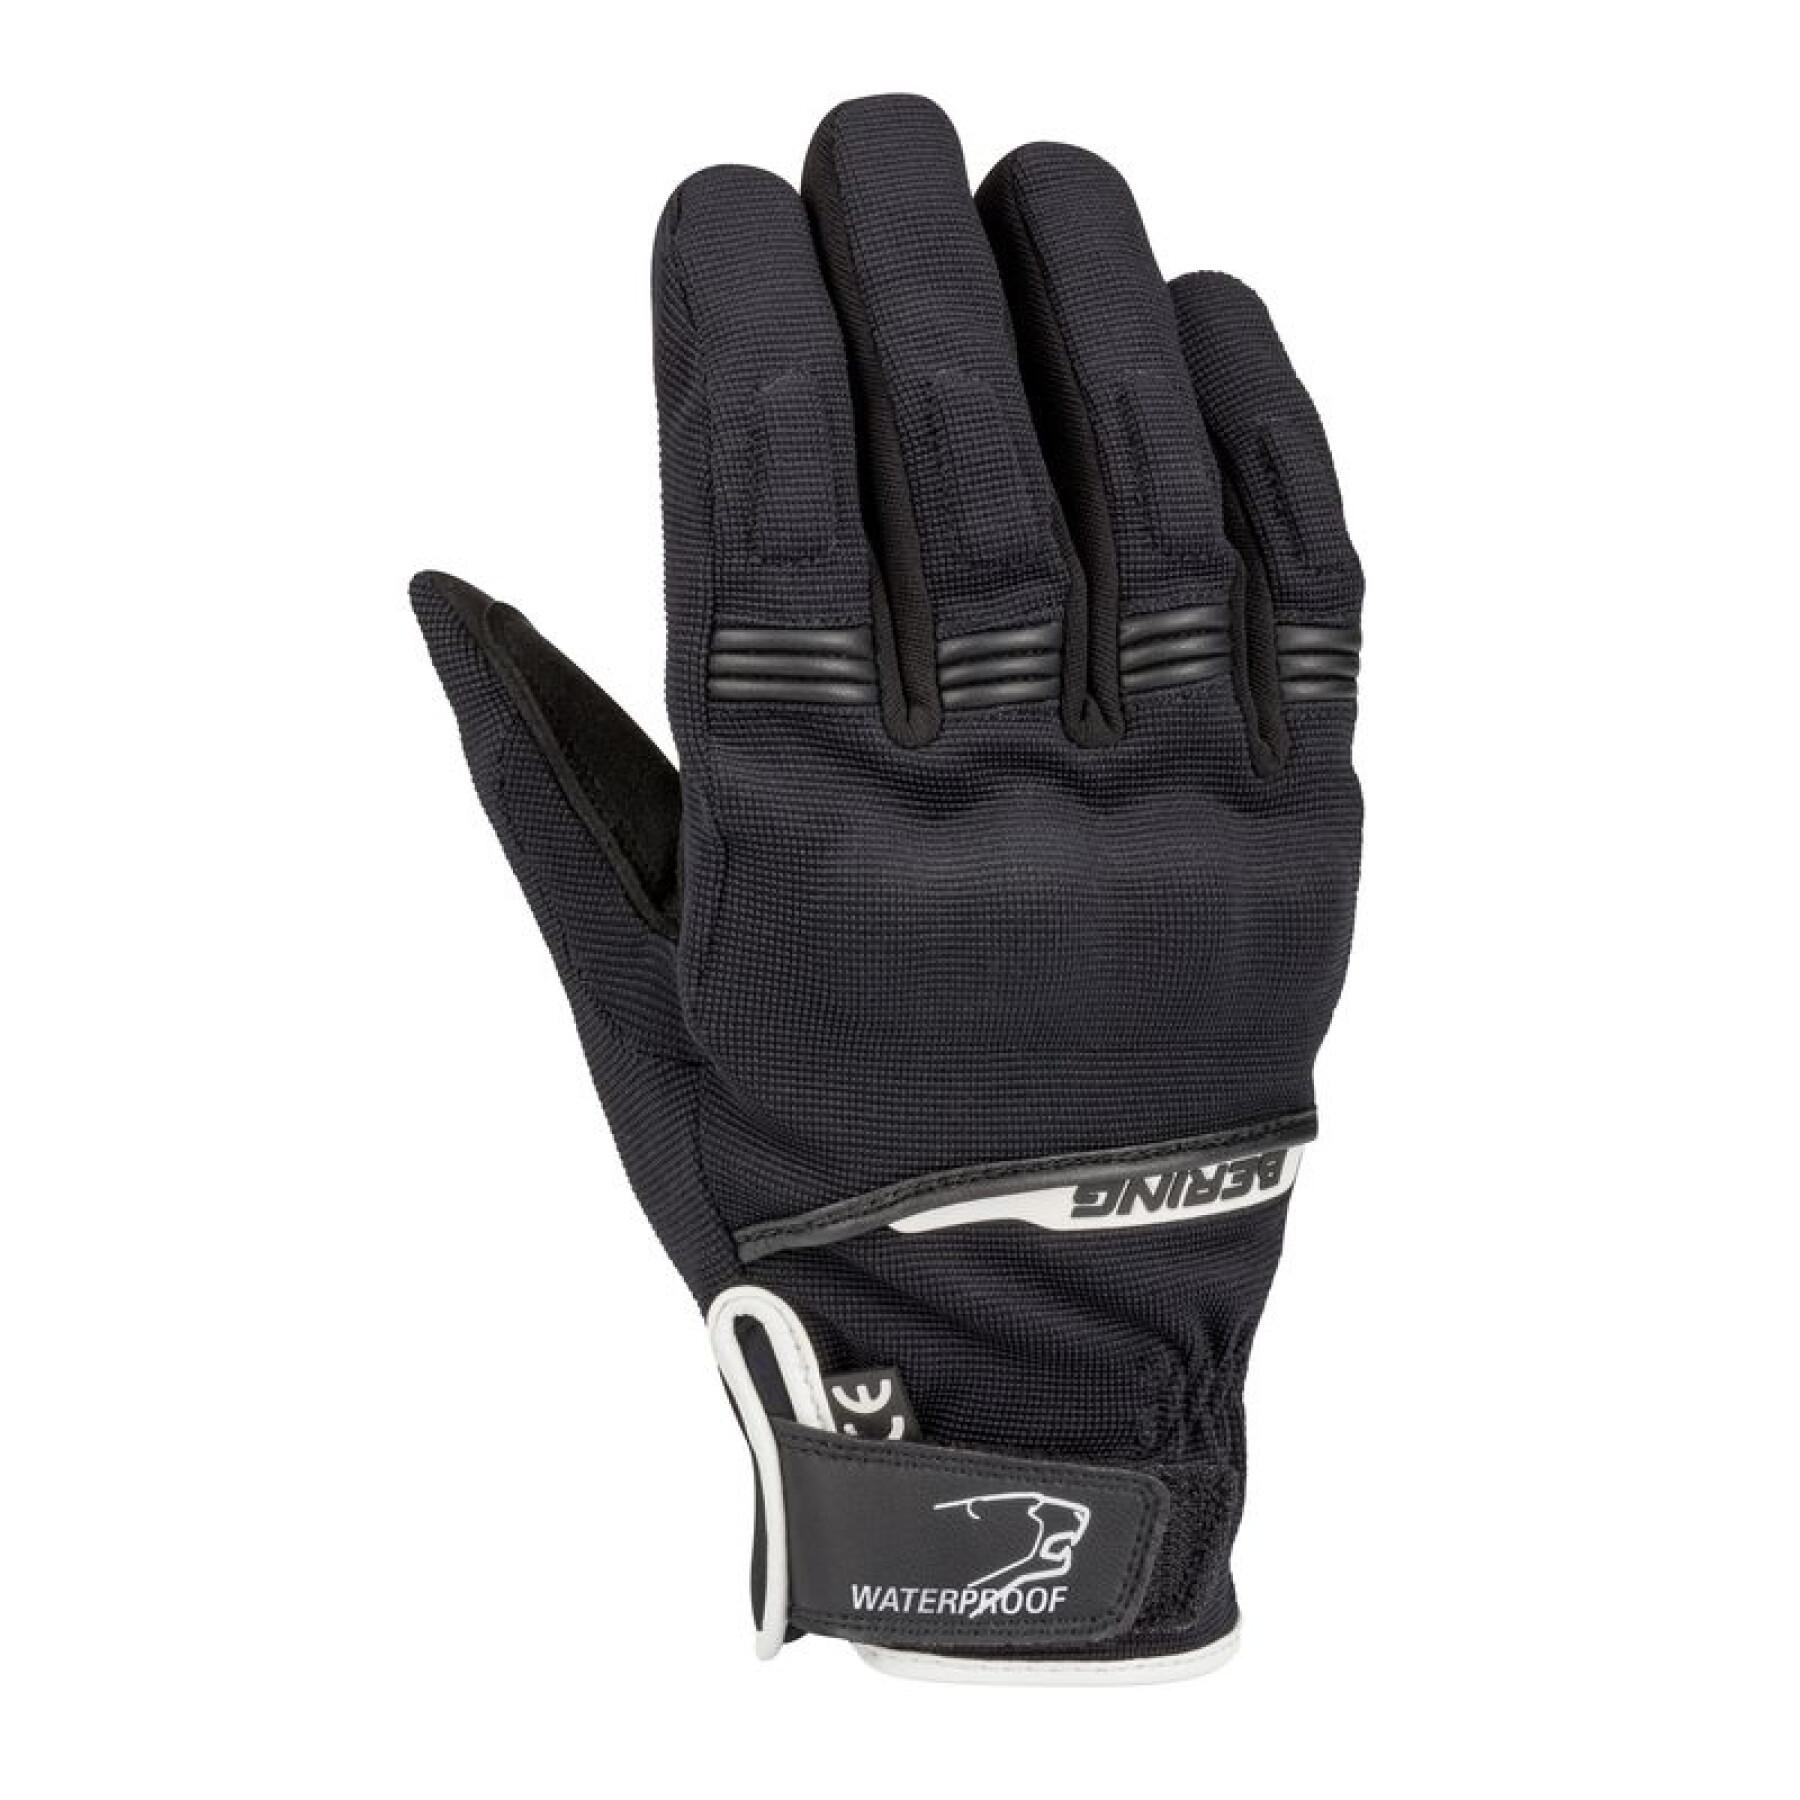 Approved mid-season motorcycle gloves Bering Borneo